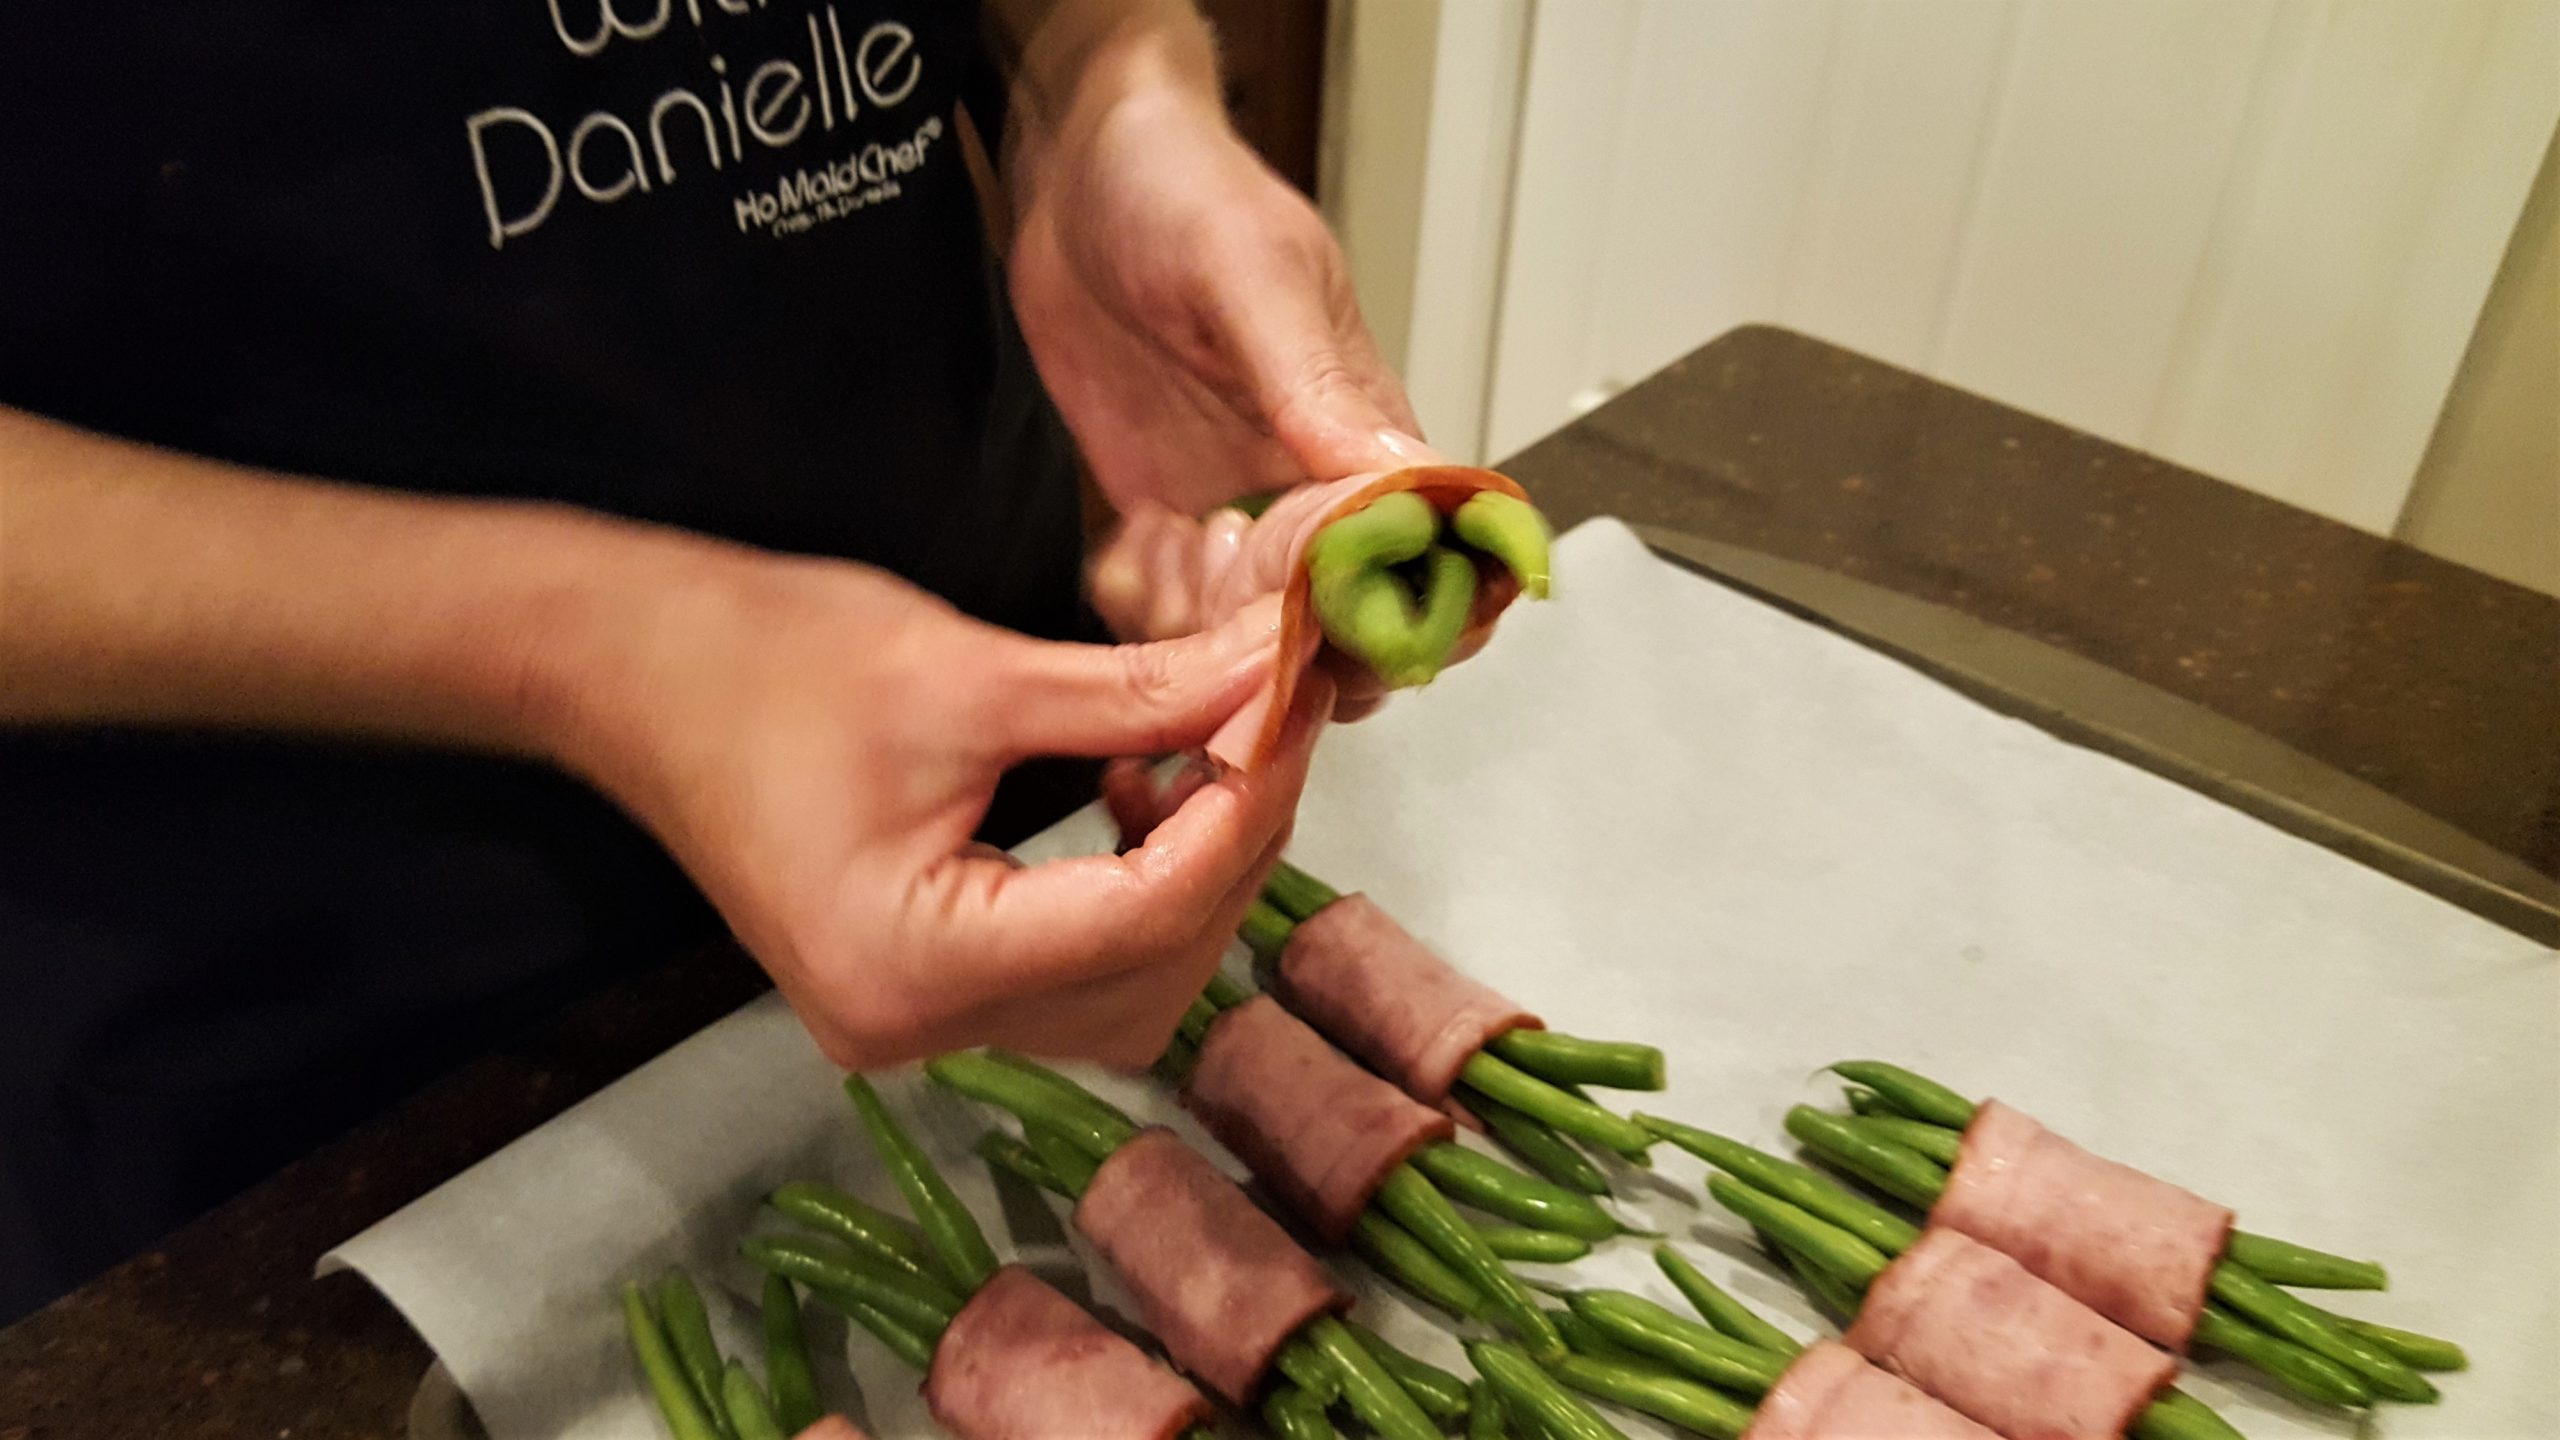 Here we show you how the wrap the turkey bacon around fresh green beans - Dining in with Danielle